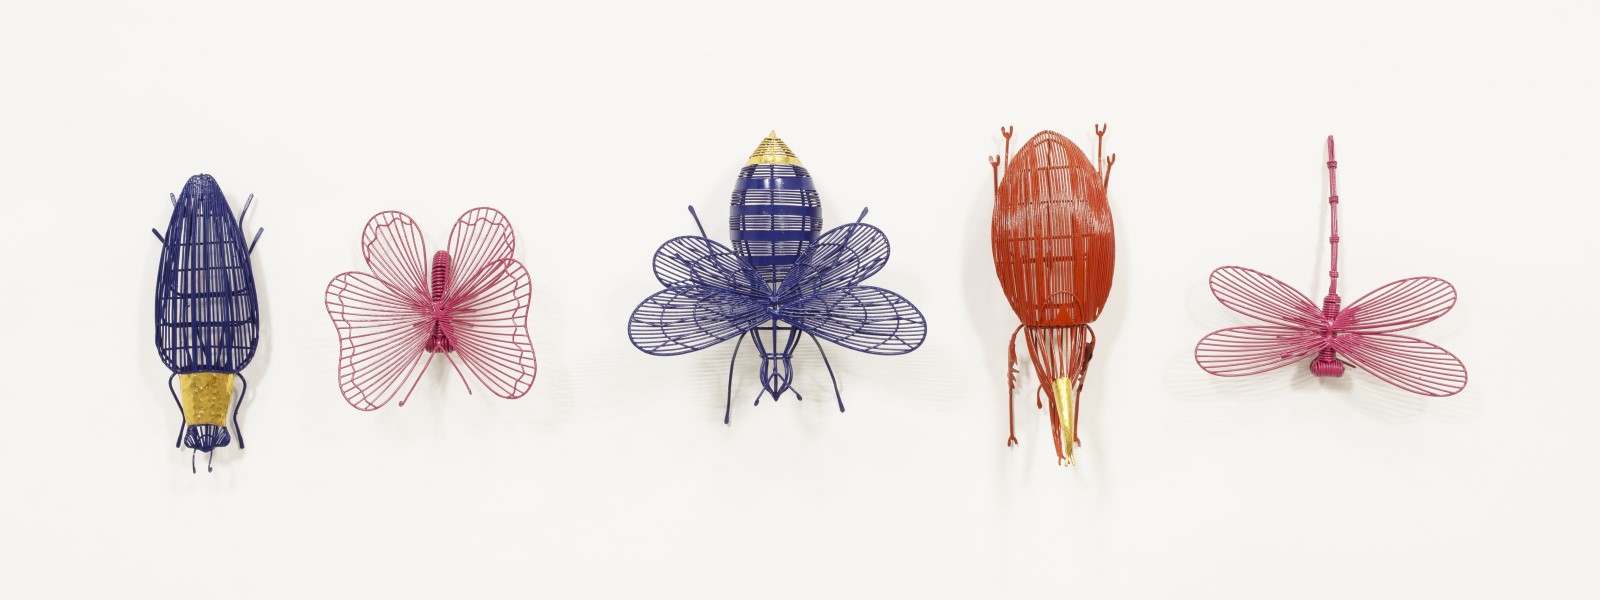 Insects with vibrant colors and a bigger scale